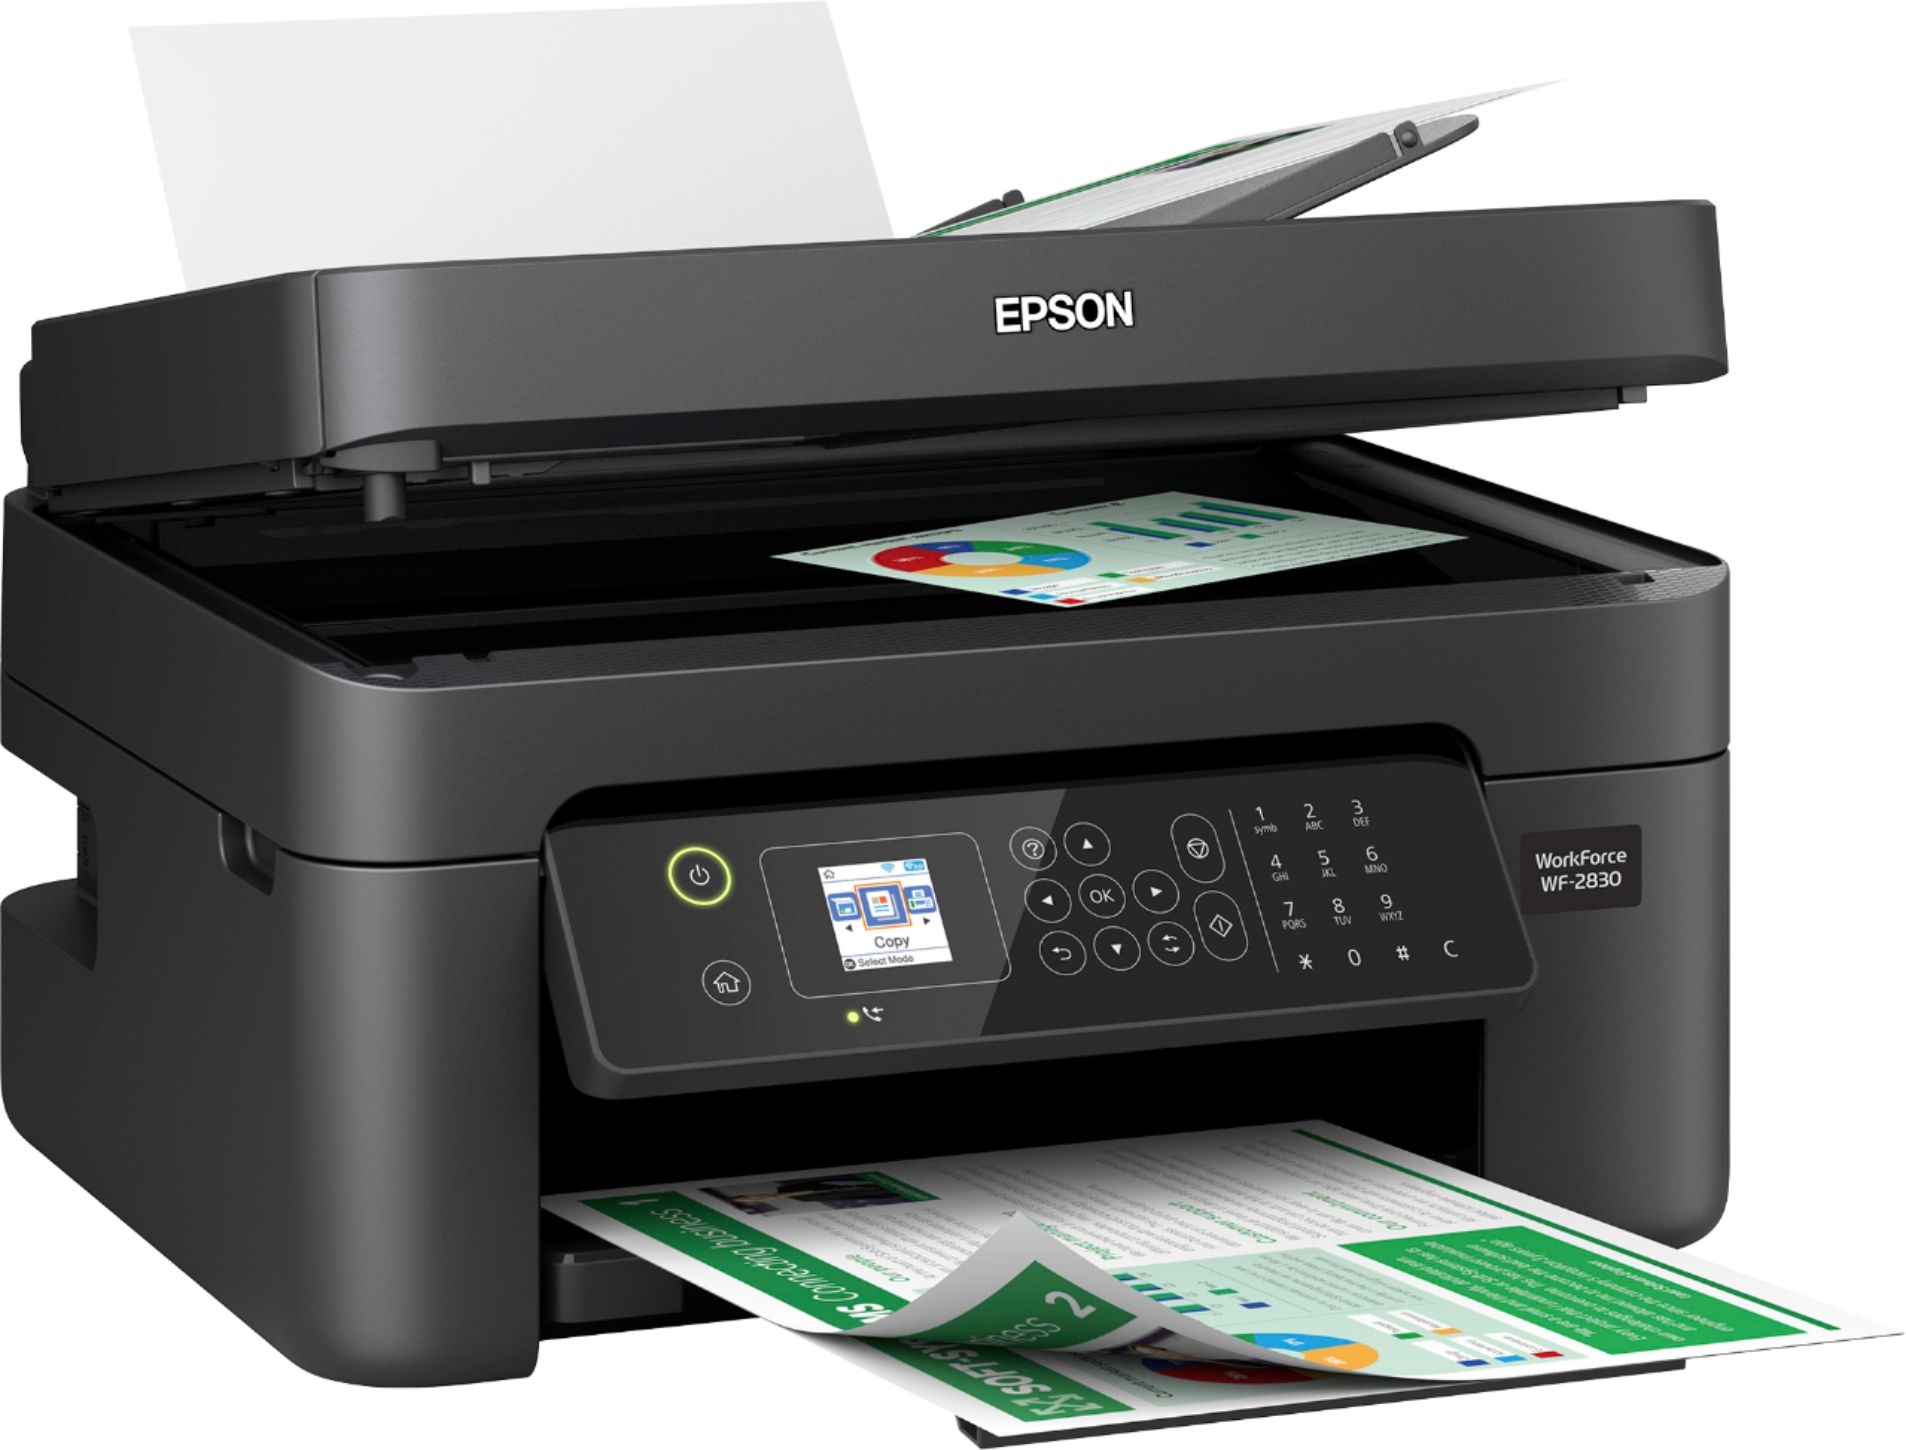 Angle View: Epson - WorkForce WF-2830 Wireless All-in-One Inkjet Printer - Black